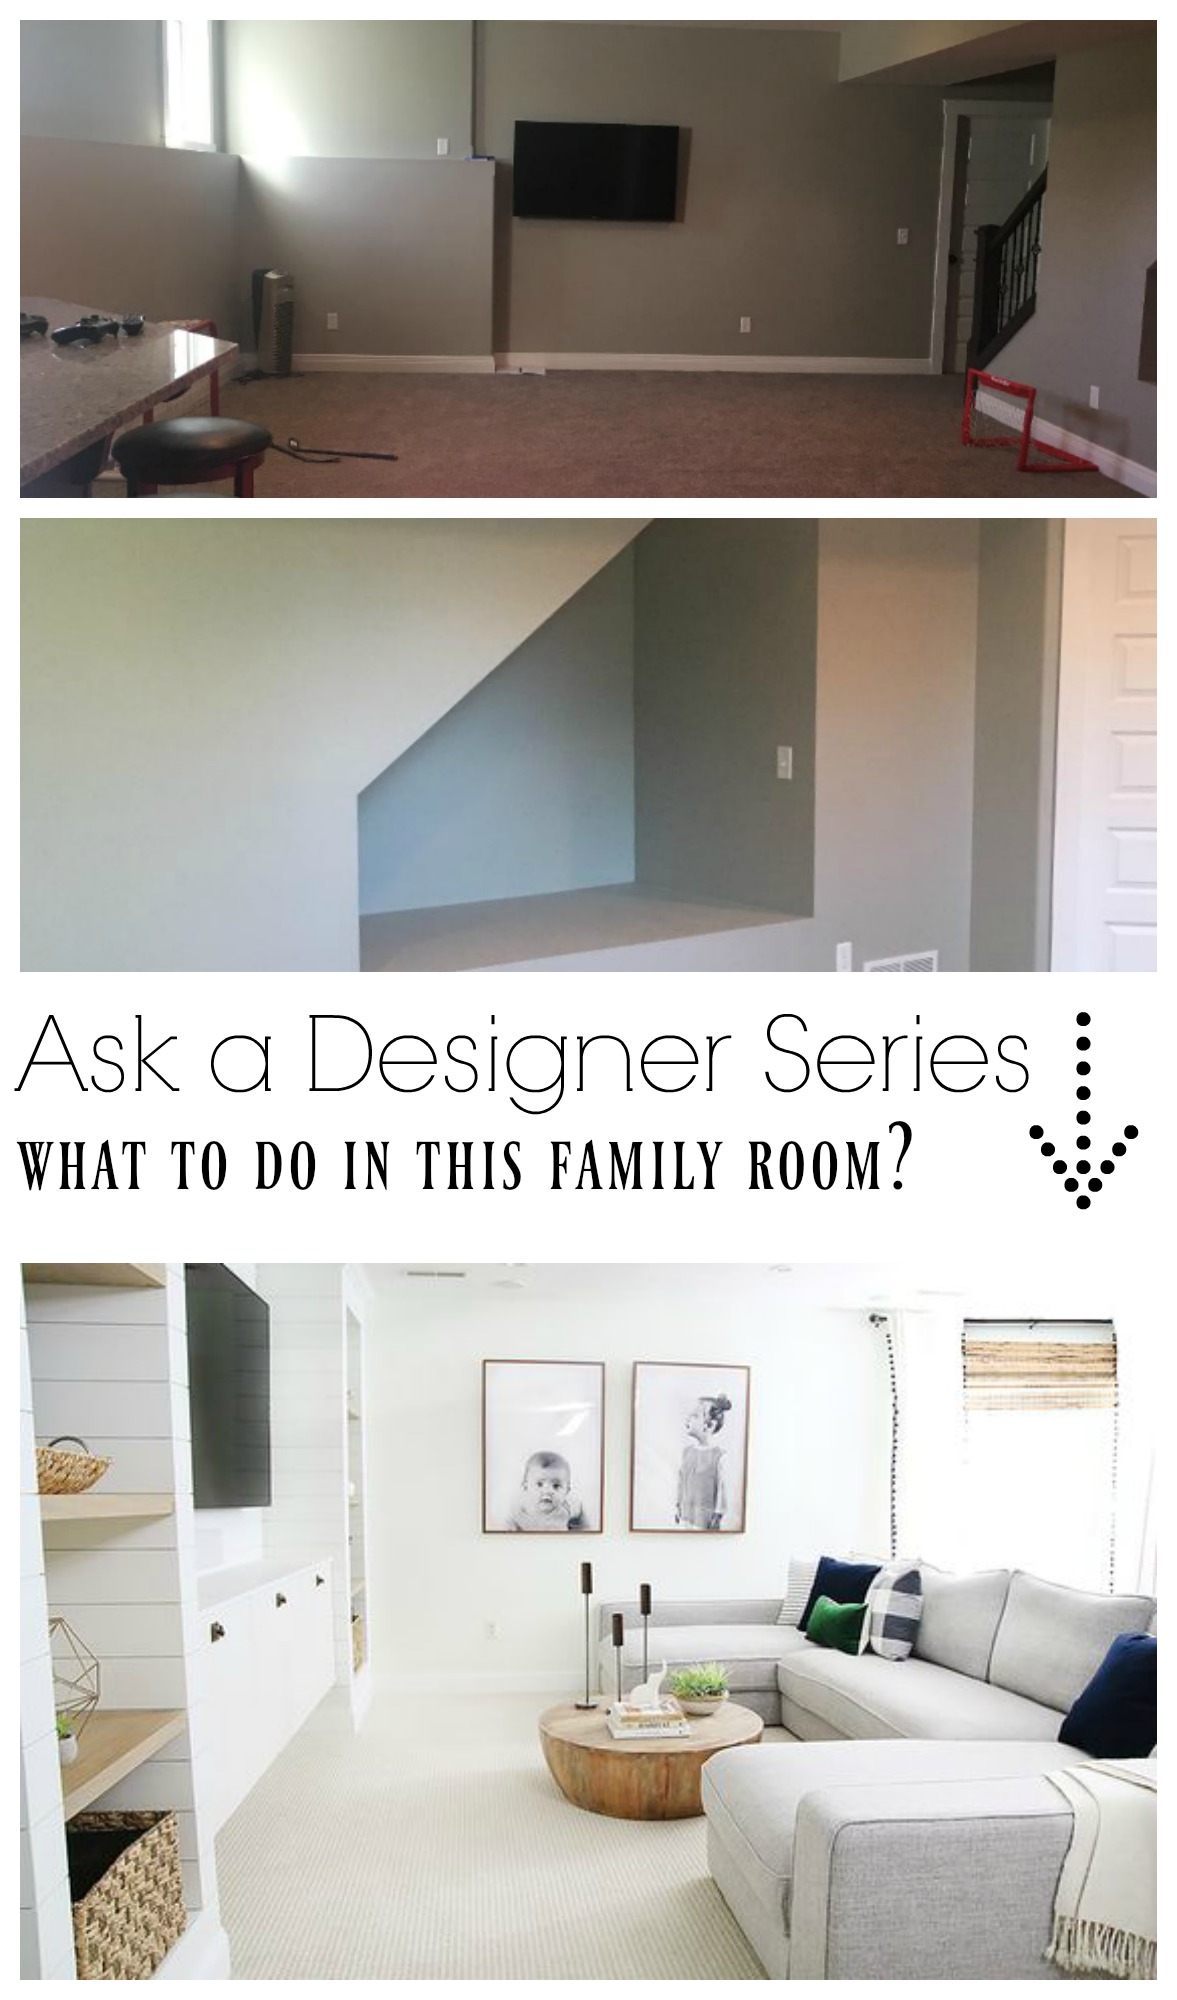 Ask a Designer Series- Ideas for Family Room that is Casual 